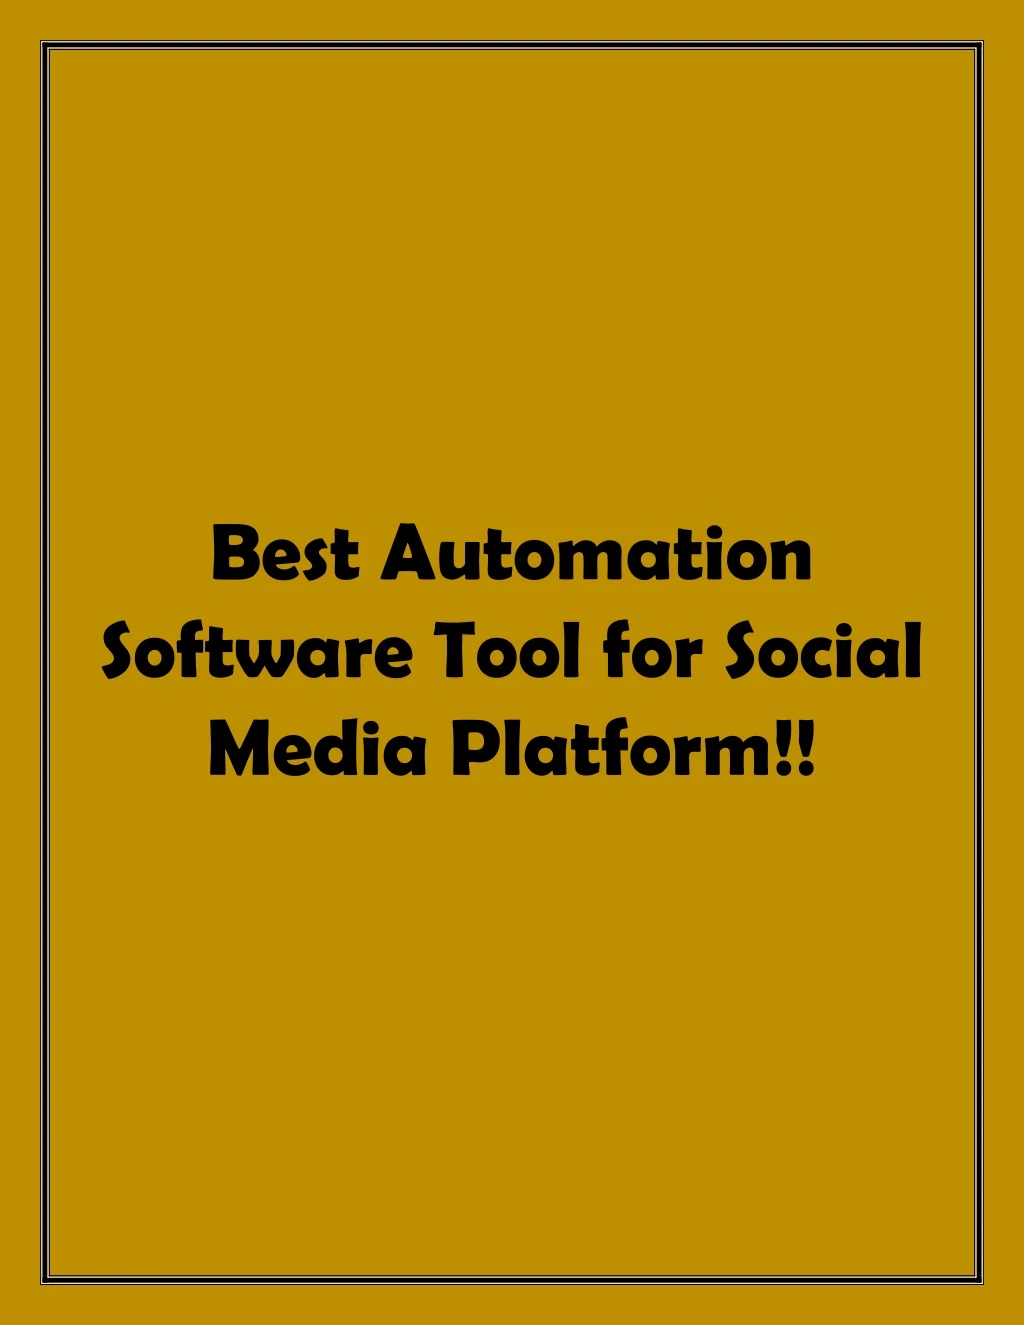 best automation software tool for social media